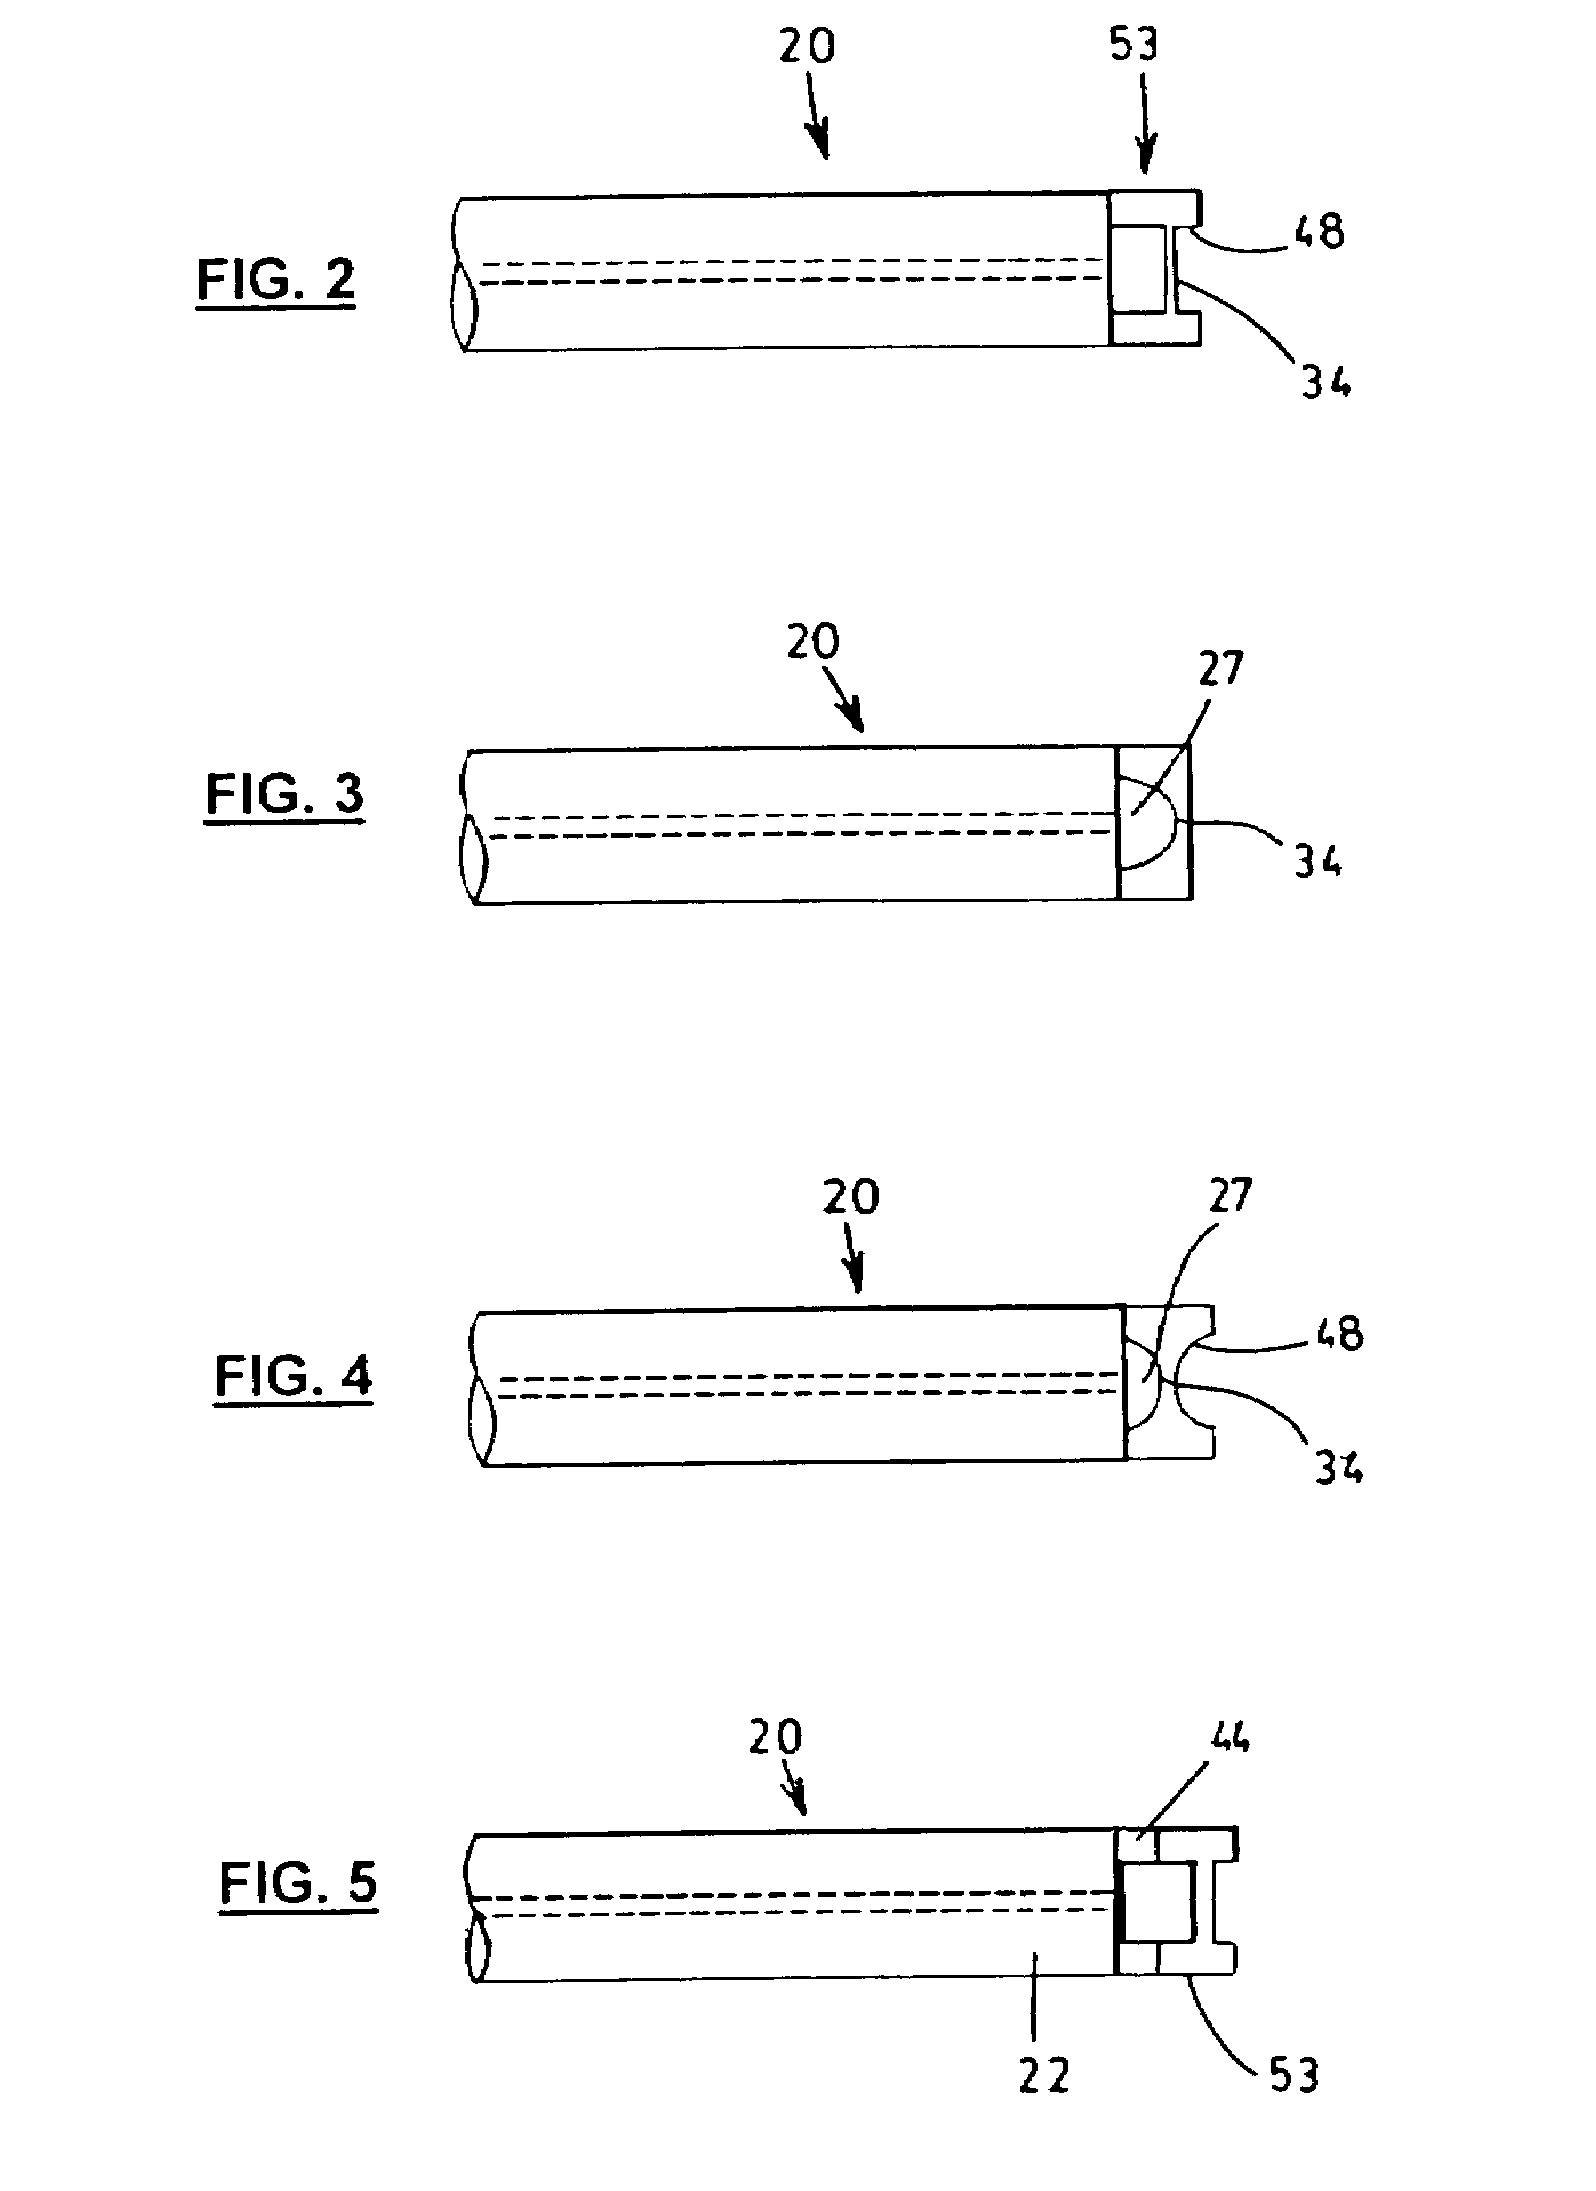 Single piece Fabry-Perot optical sensor and method of manufacturing the same